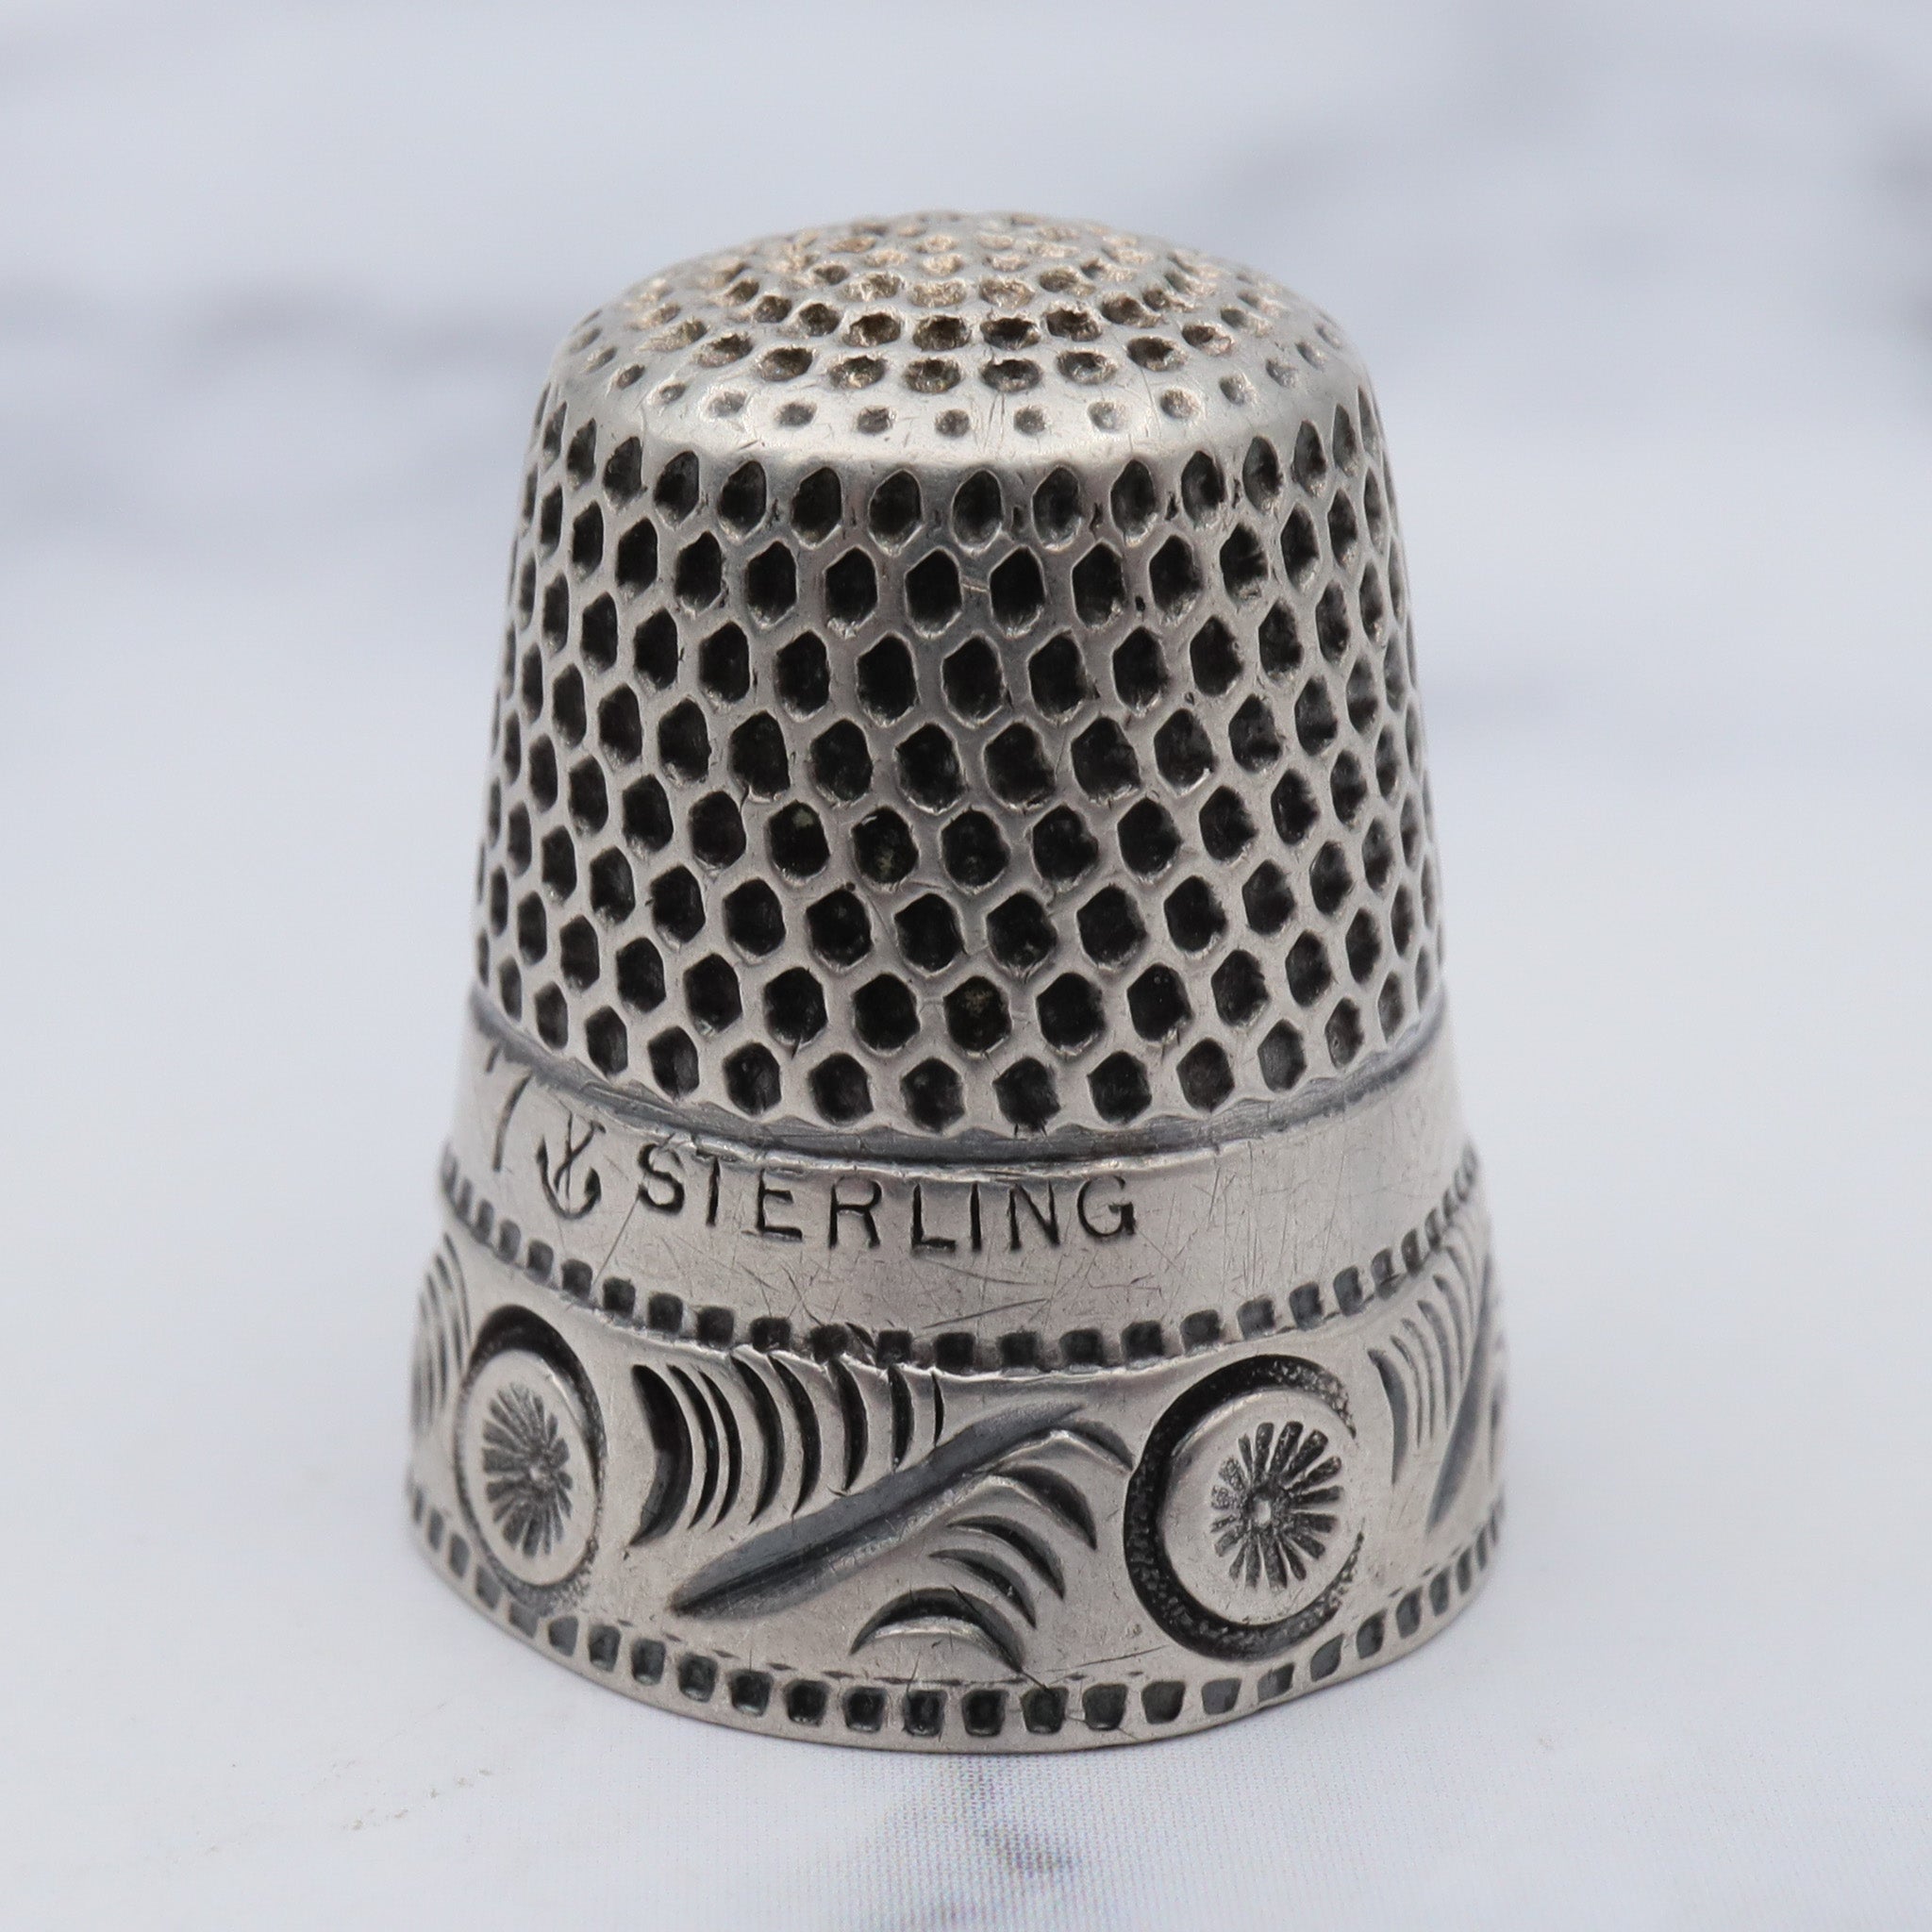 Antique Victorian Stern Brothers Co. sterling thimble, sz 7